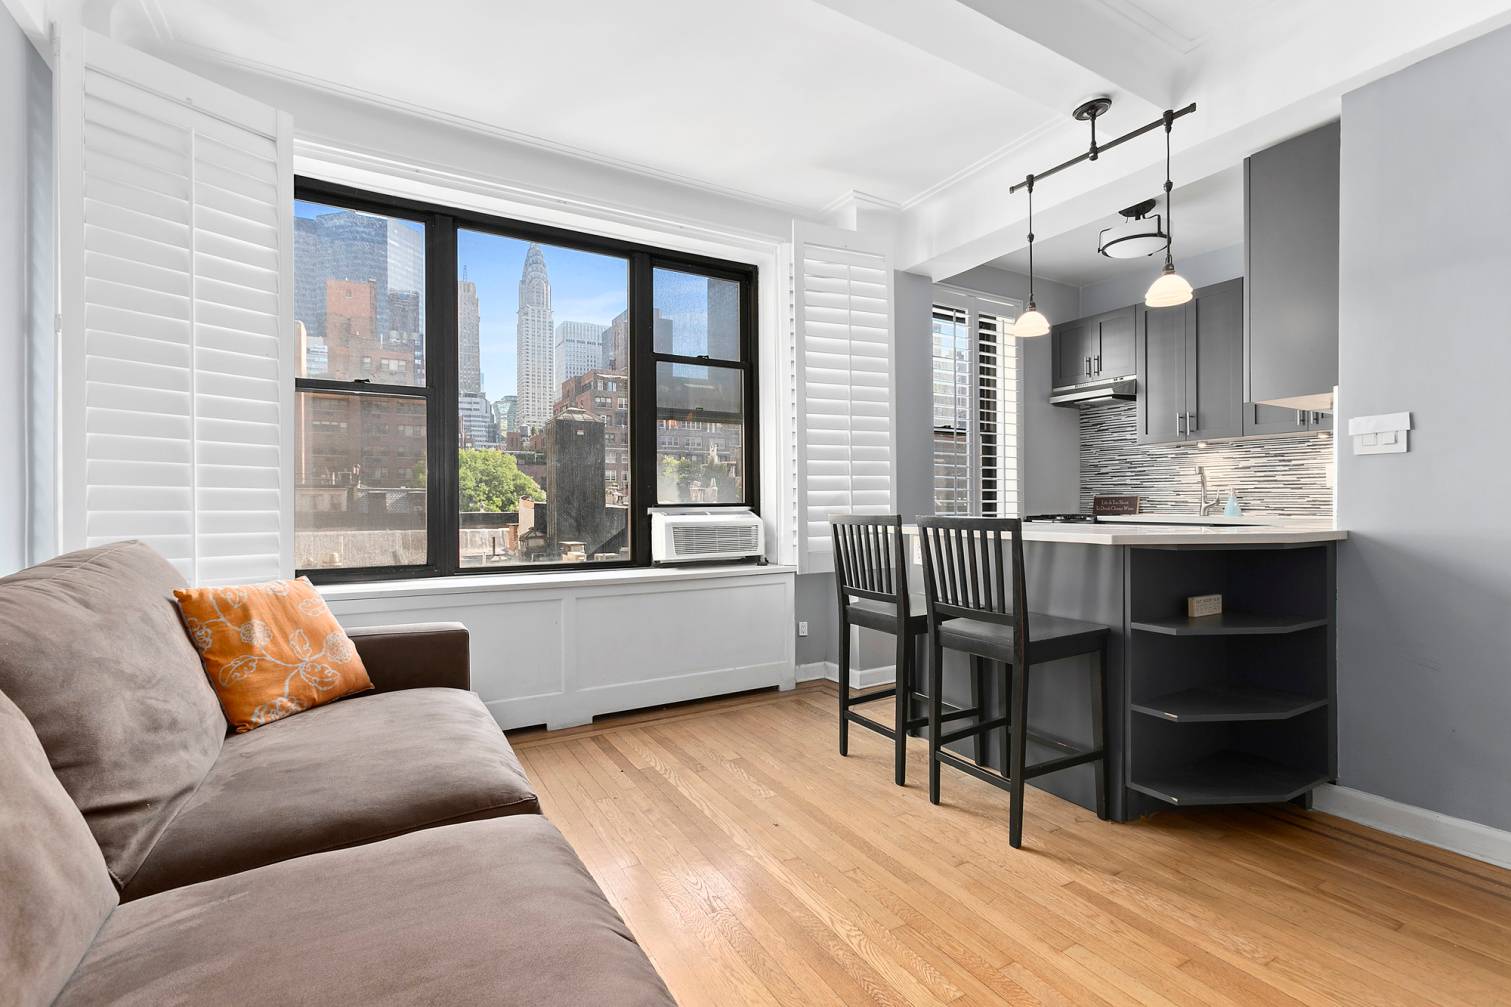 Gut renovated to perfection, this prewar studio offers a stunning open Northern exposure with a direct view of the Chrysler Building, lovely prewar charm and an unbeatably convenient location.